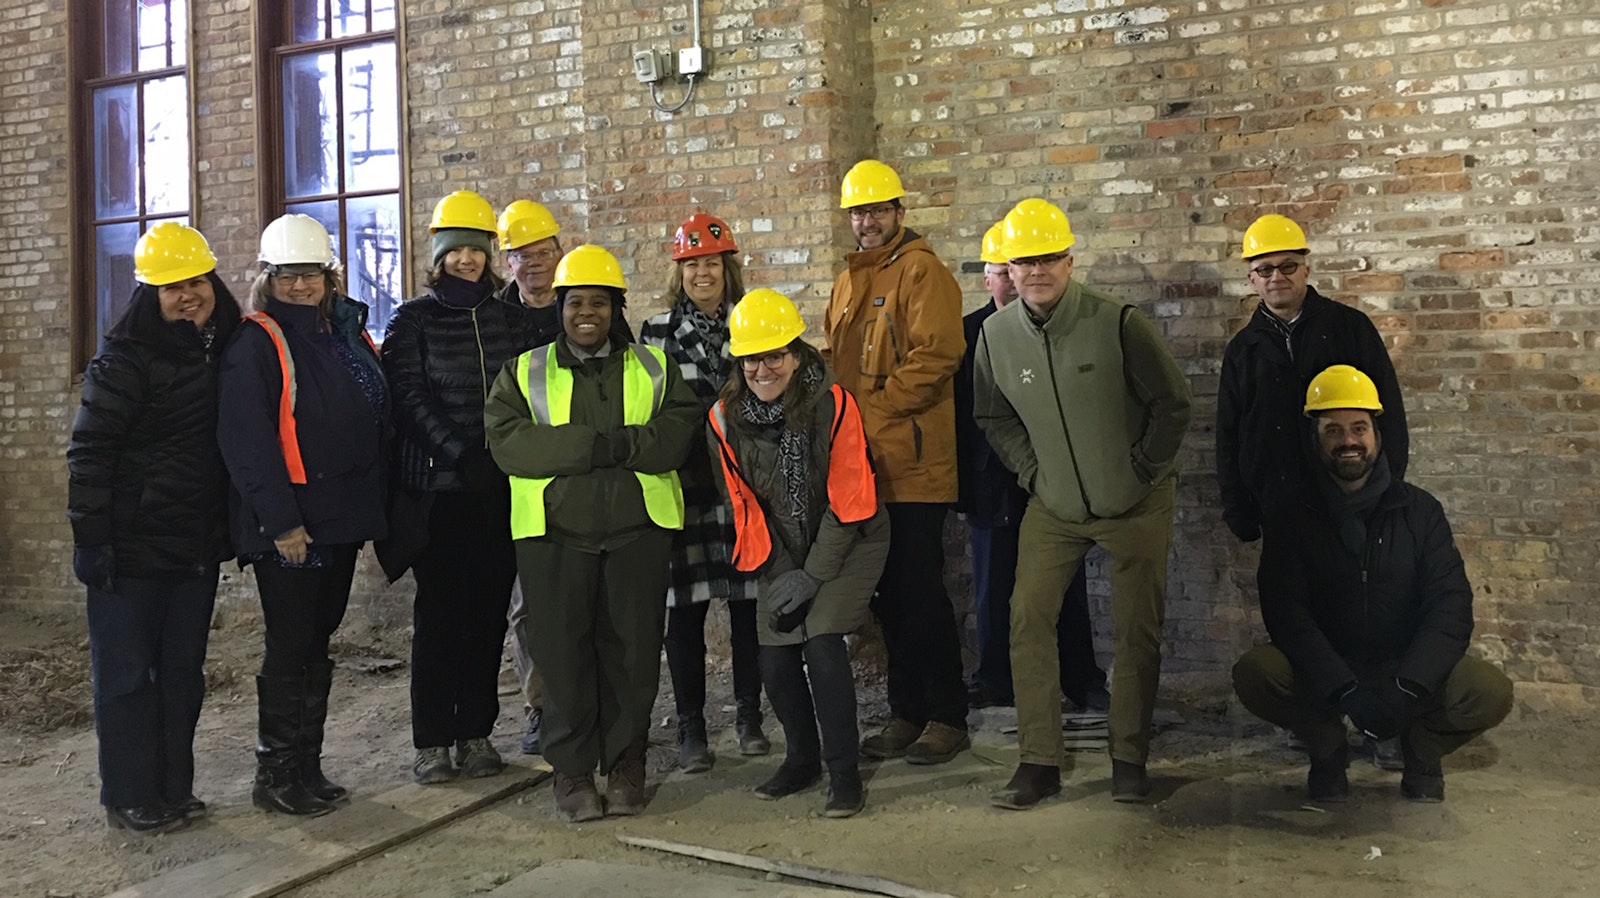 A group of people in hard hats stand together for a picture